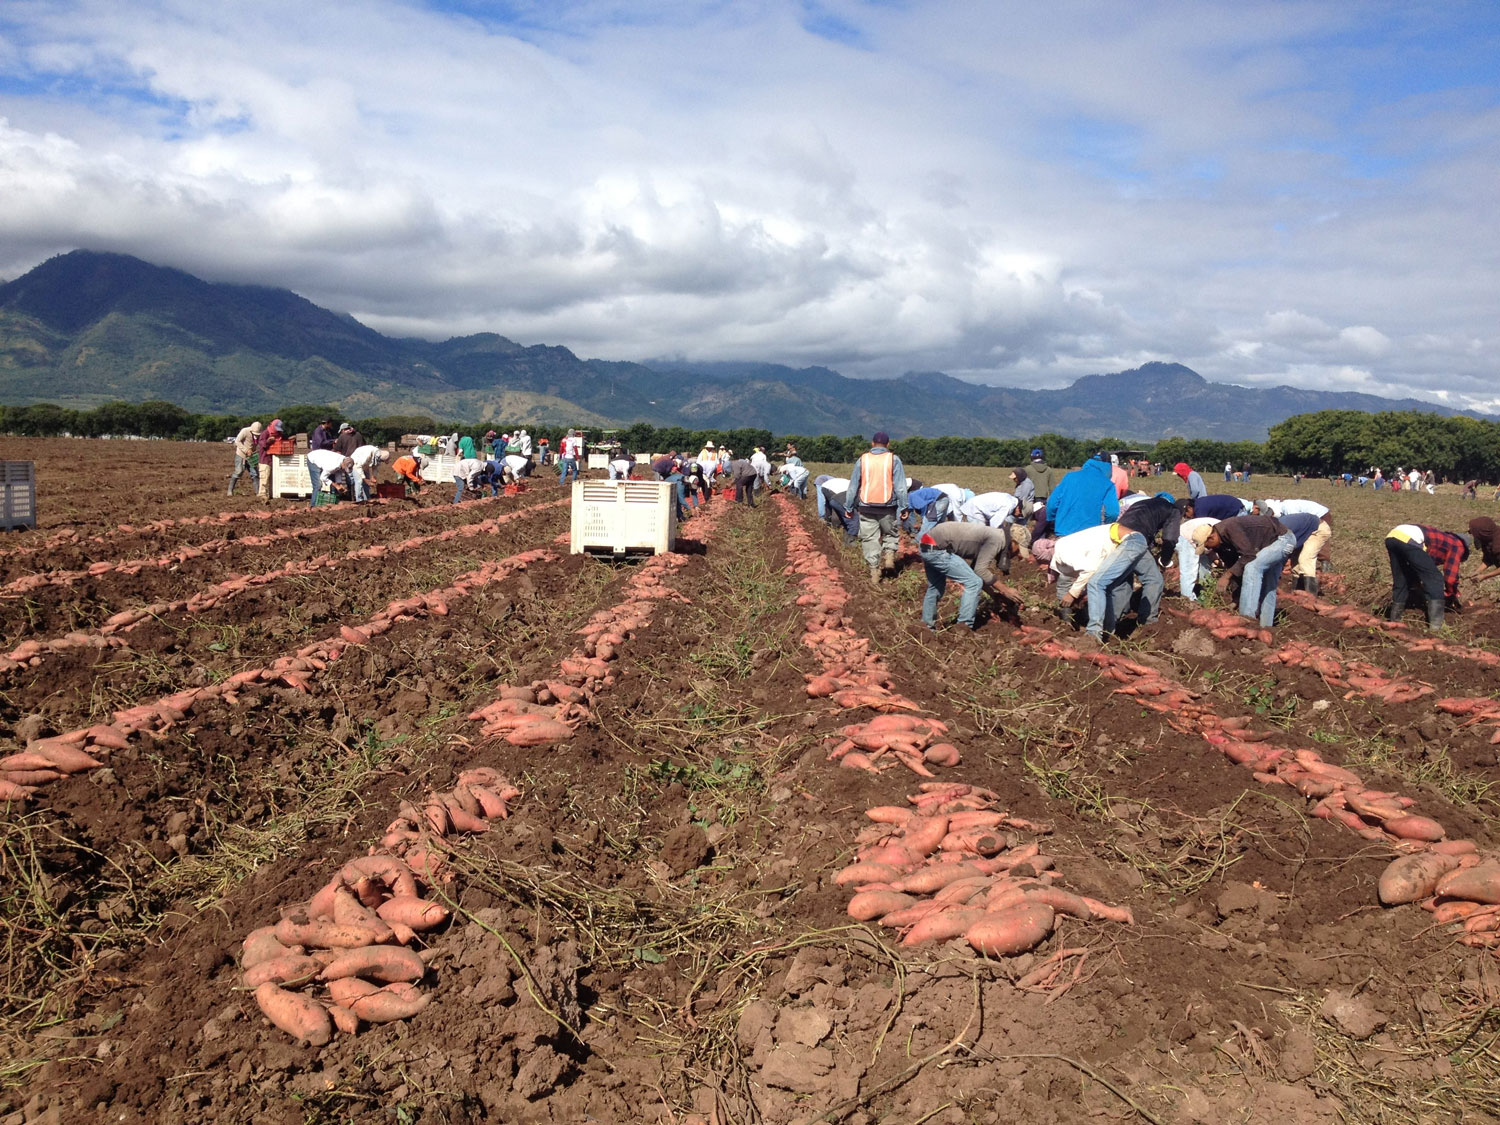 Field of sweet potatoes being harvested by hand by a lot of people